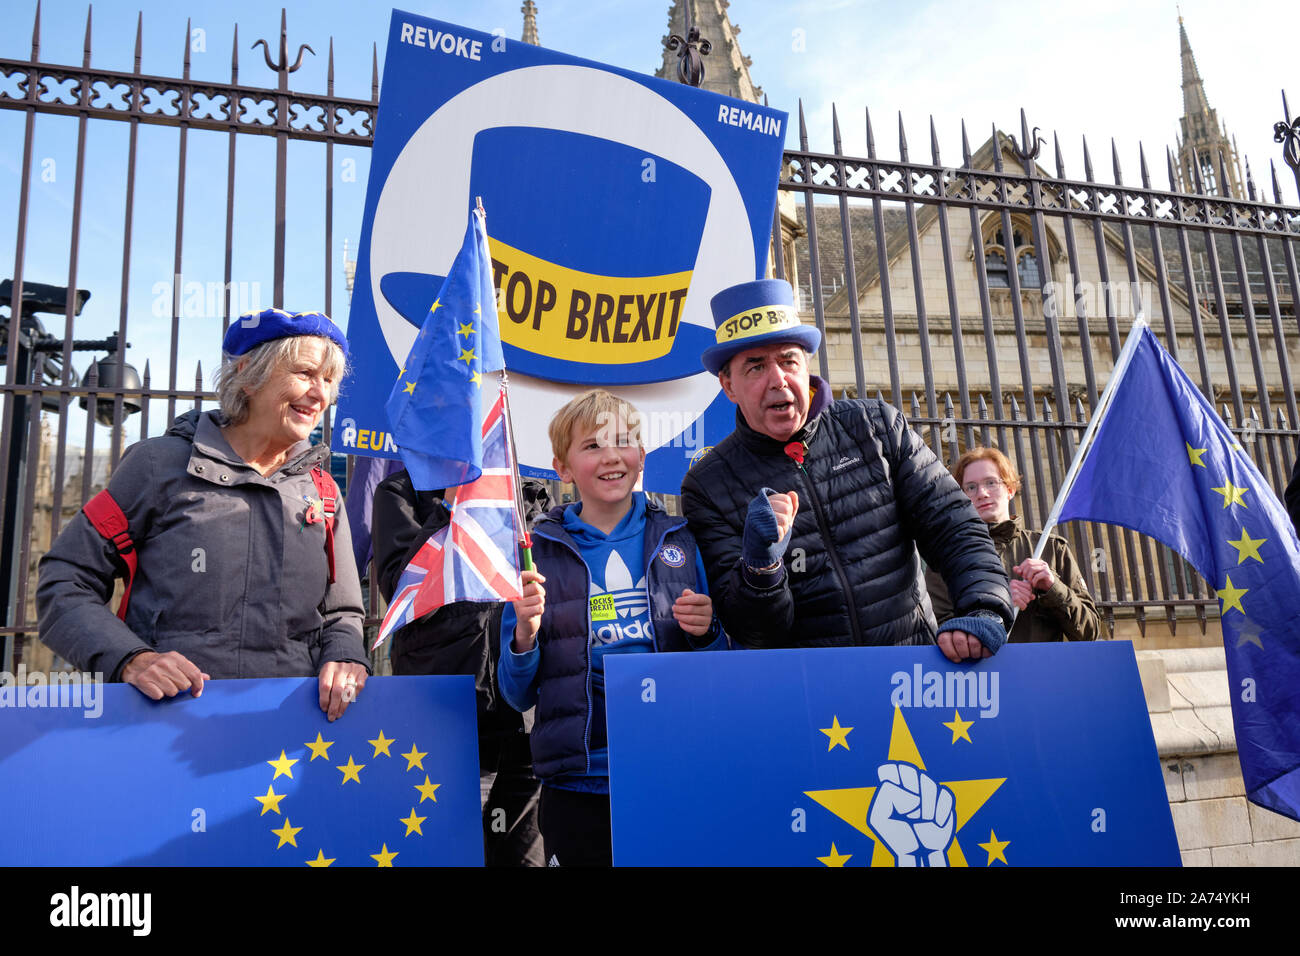 Westminster, England, UK. 30th October 2019.  Remain protesters in front of the House of Commons celebrating another delay in Brexit implementation, highlighting that the imposed deadline of Halloween will go by with the UK still in the European Union, contrarily to promises by the Prime Minister. Steve Bray posing with family of supporter. Credit: JF Pelletier/Alamy Live News. Stock Photo